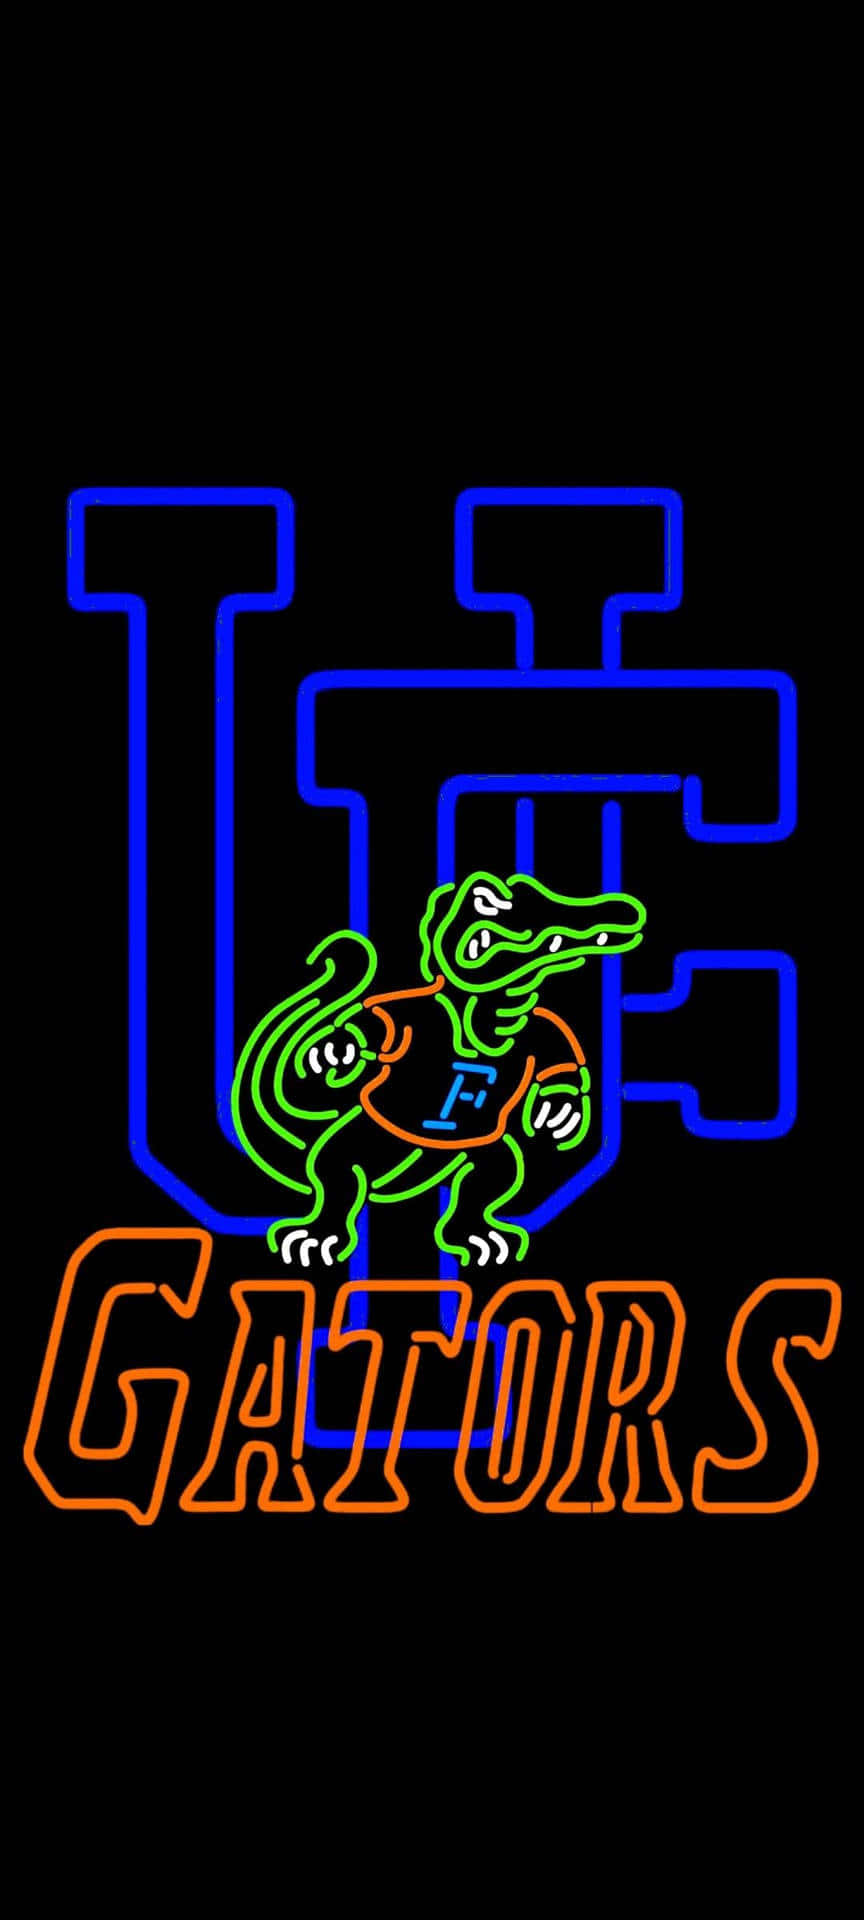 The Official Logo of the Florida Gators Wallpaper